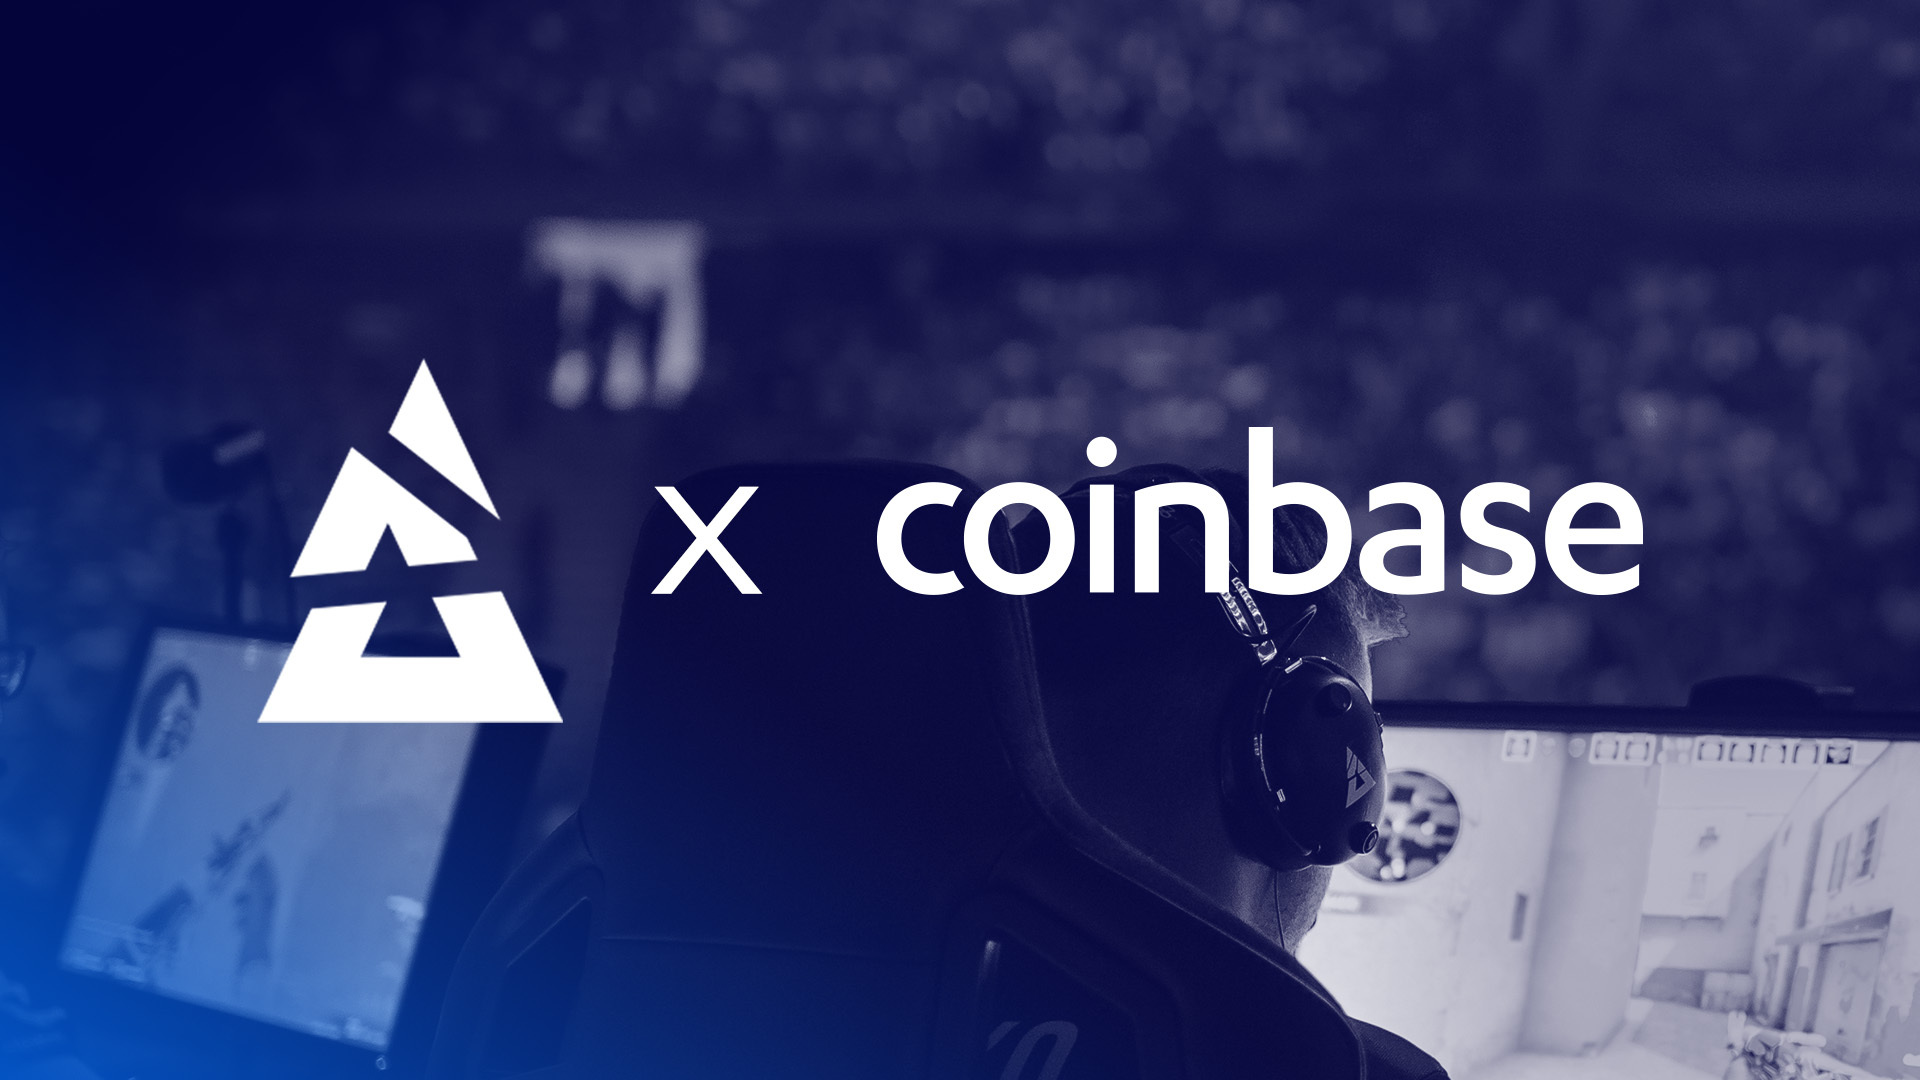 Digital worlds of esports and cryptocurrency to meet in BLAST Premier and Coinbase deal